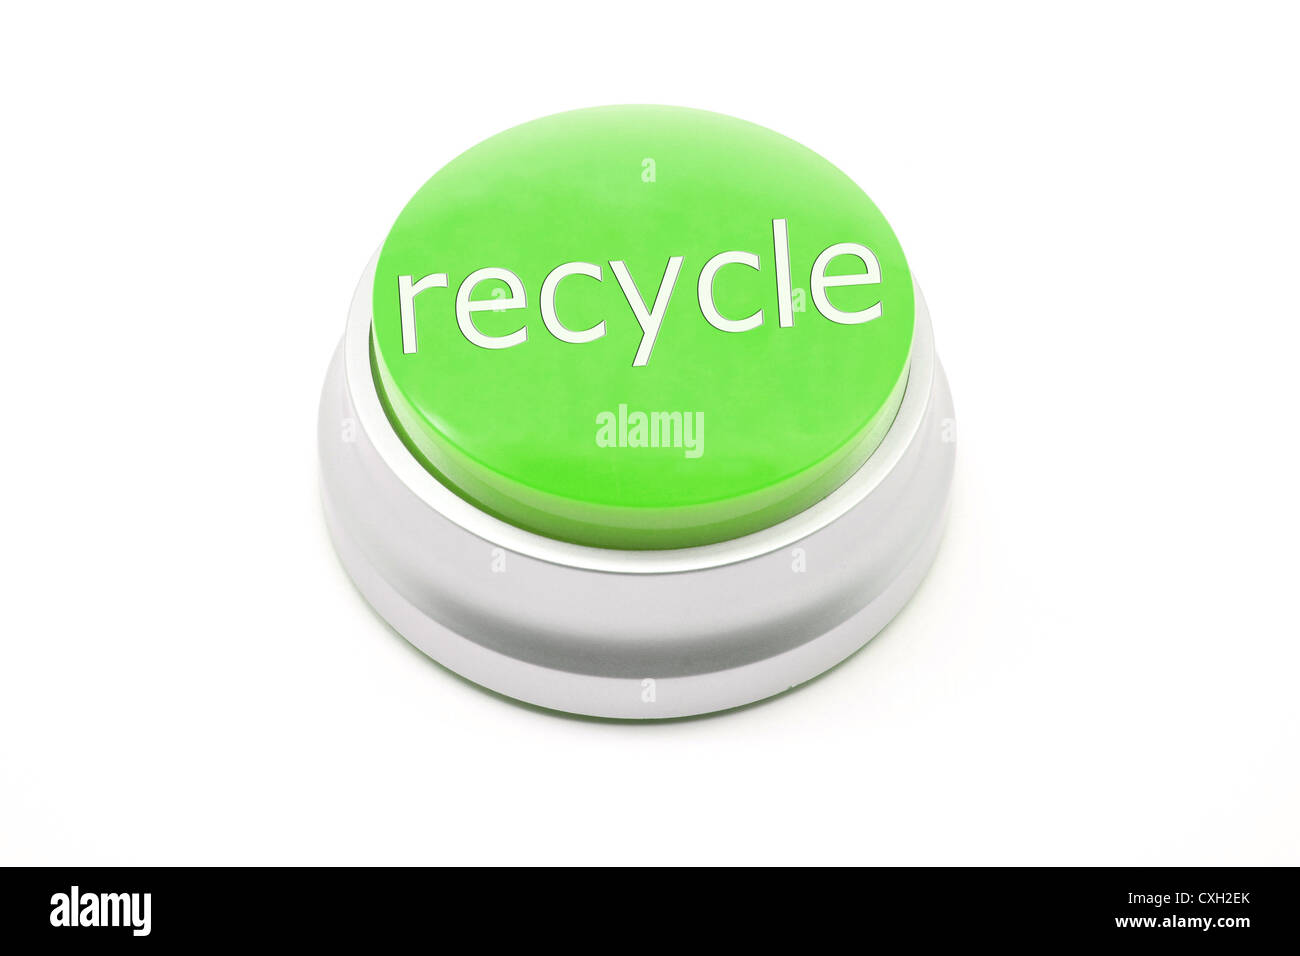 Large green Recycle button making a great conceptual image Stock Photo